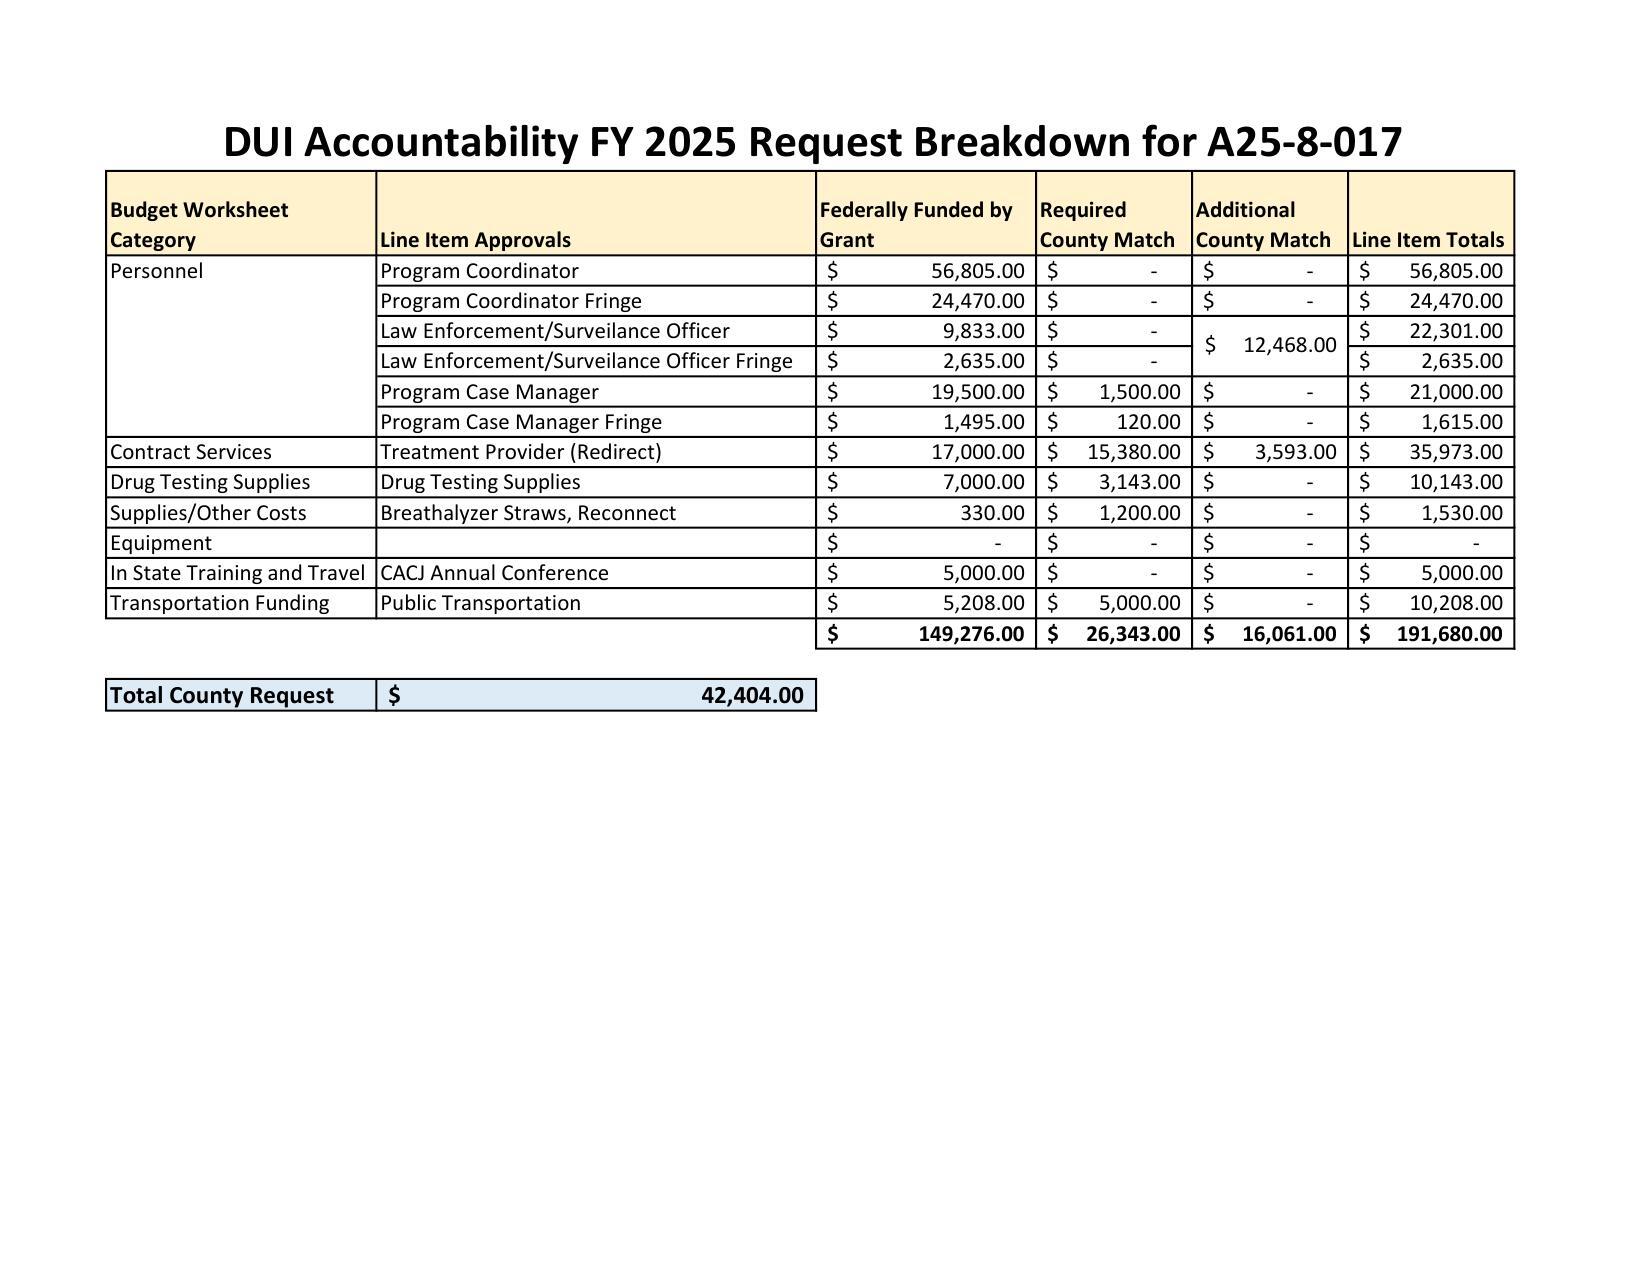 DUI Accountability FY 2025 Request Breakdown for A25-8-017